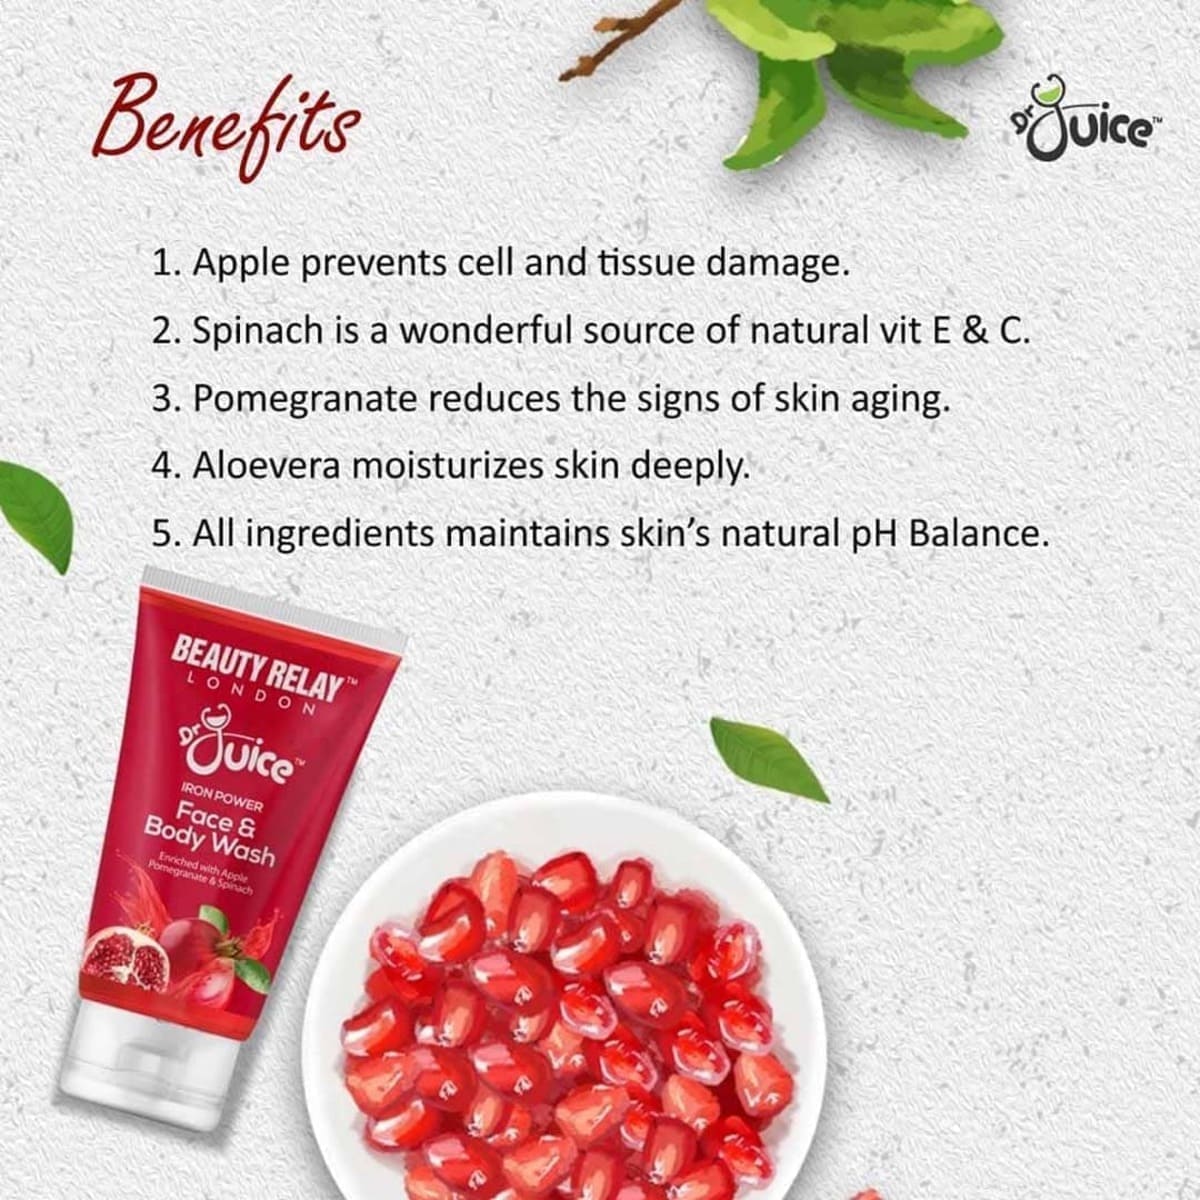 Dr. Juice Iron Power Face & Body Wash Enriched With Apple, Pomegranate, Spinach, Aloe Vera, Olive Oil